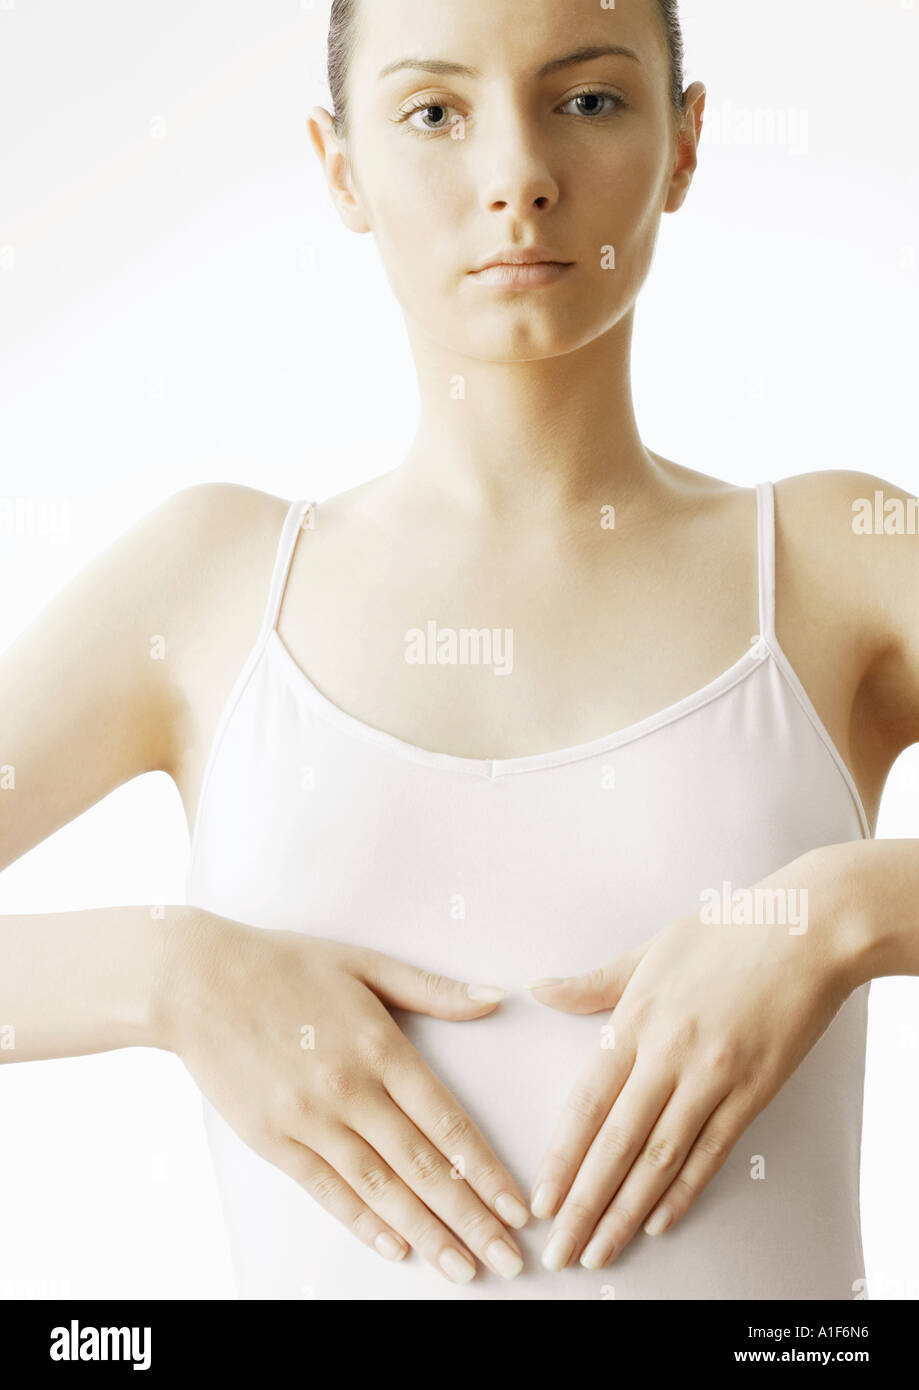 Woman holding hands over stomach Stock Photo